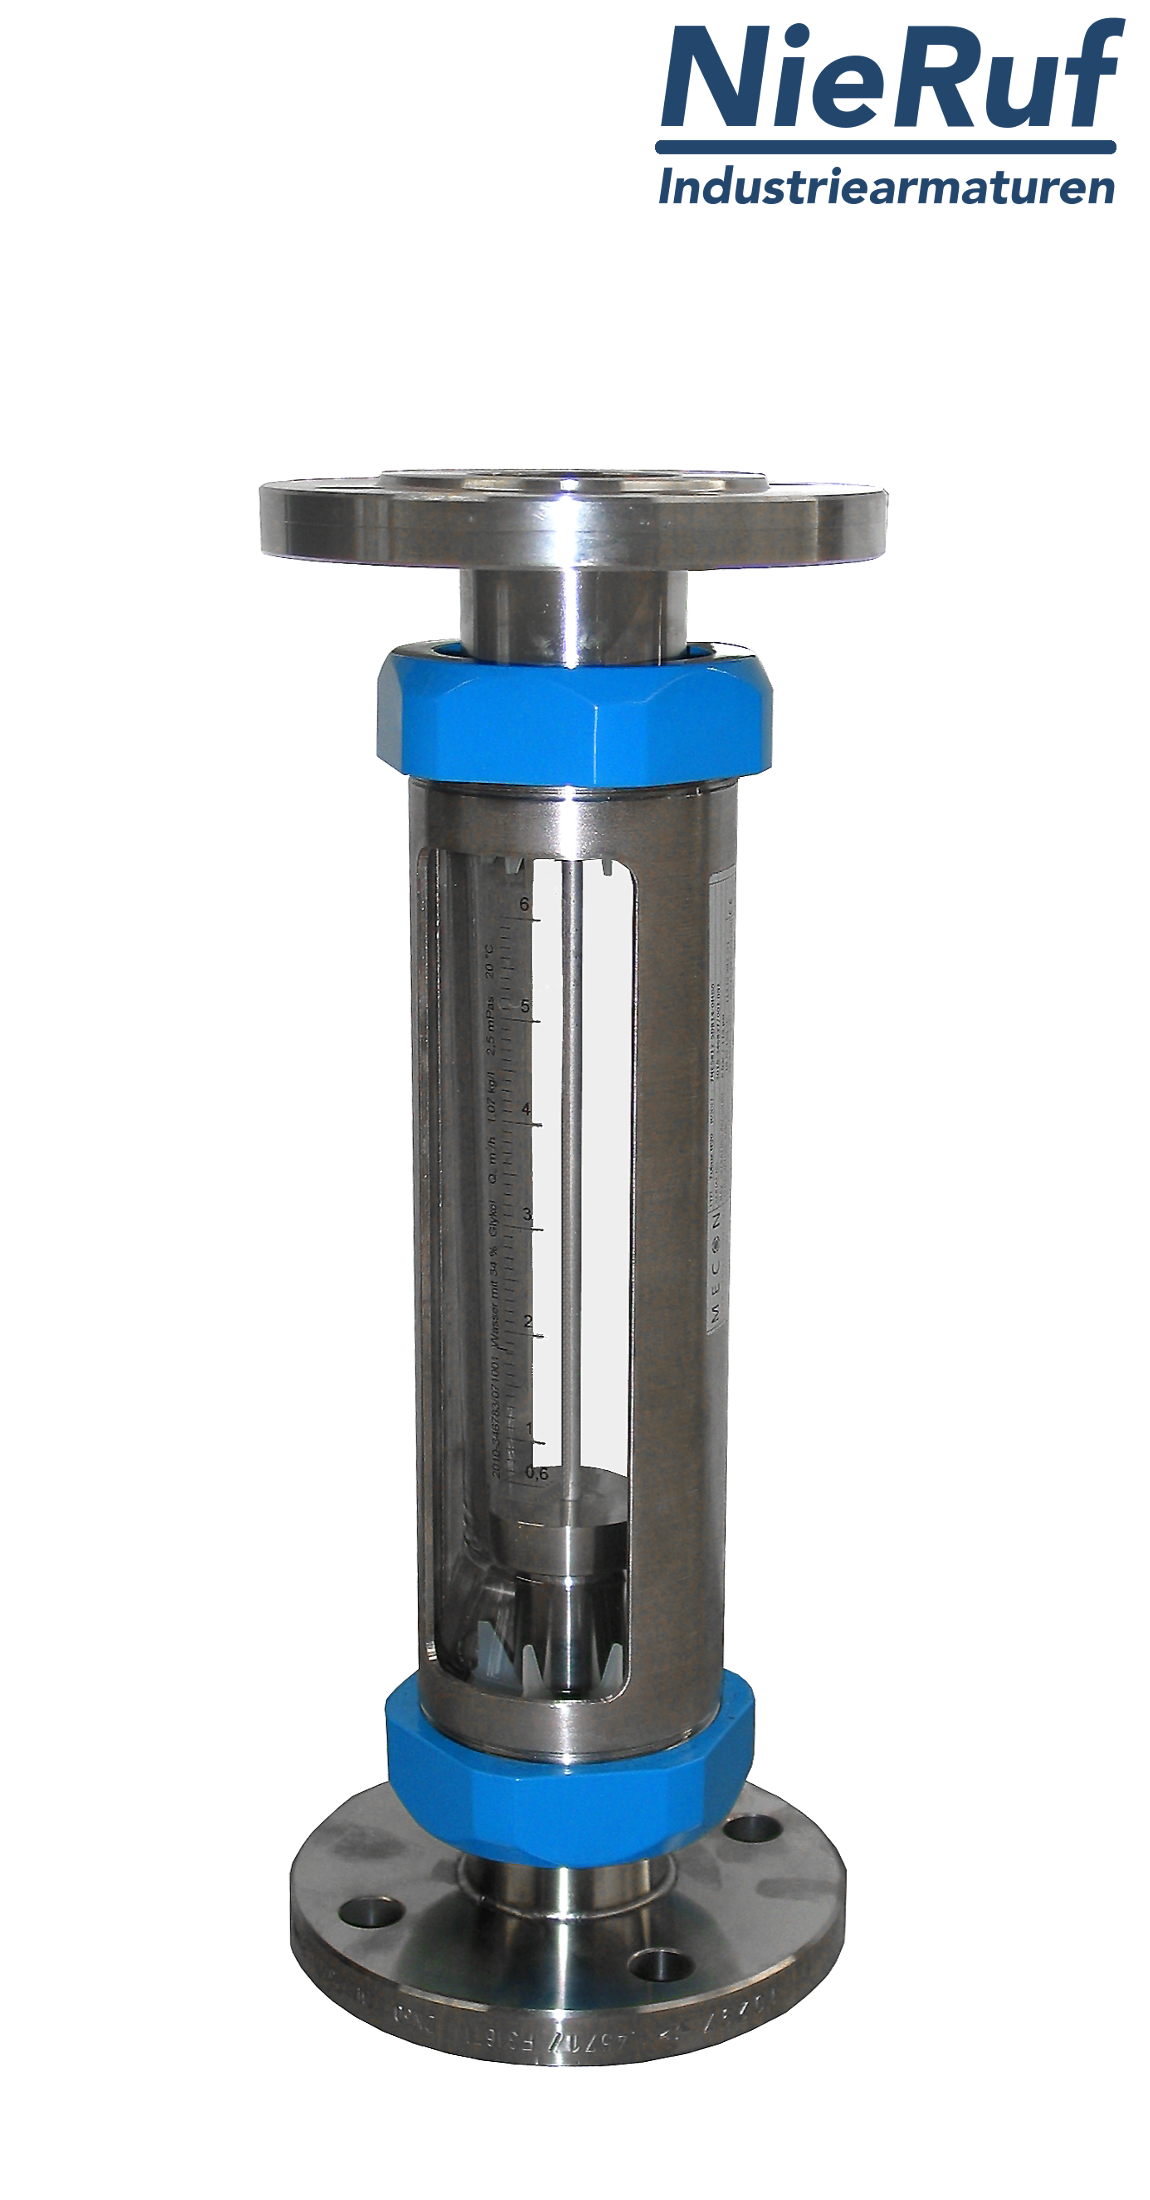 Variable area flowmeter stainless steel + borosilicate flange DN50 800.0 - 8000 l/h water FKM